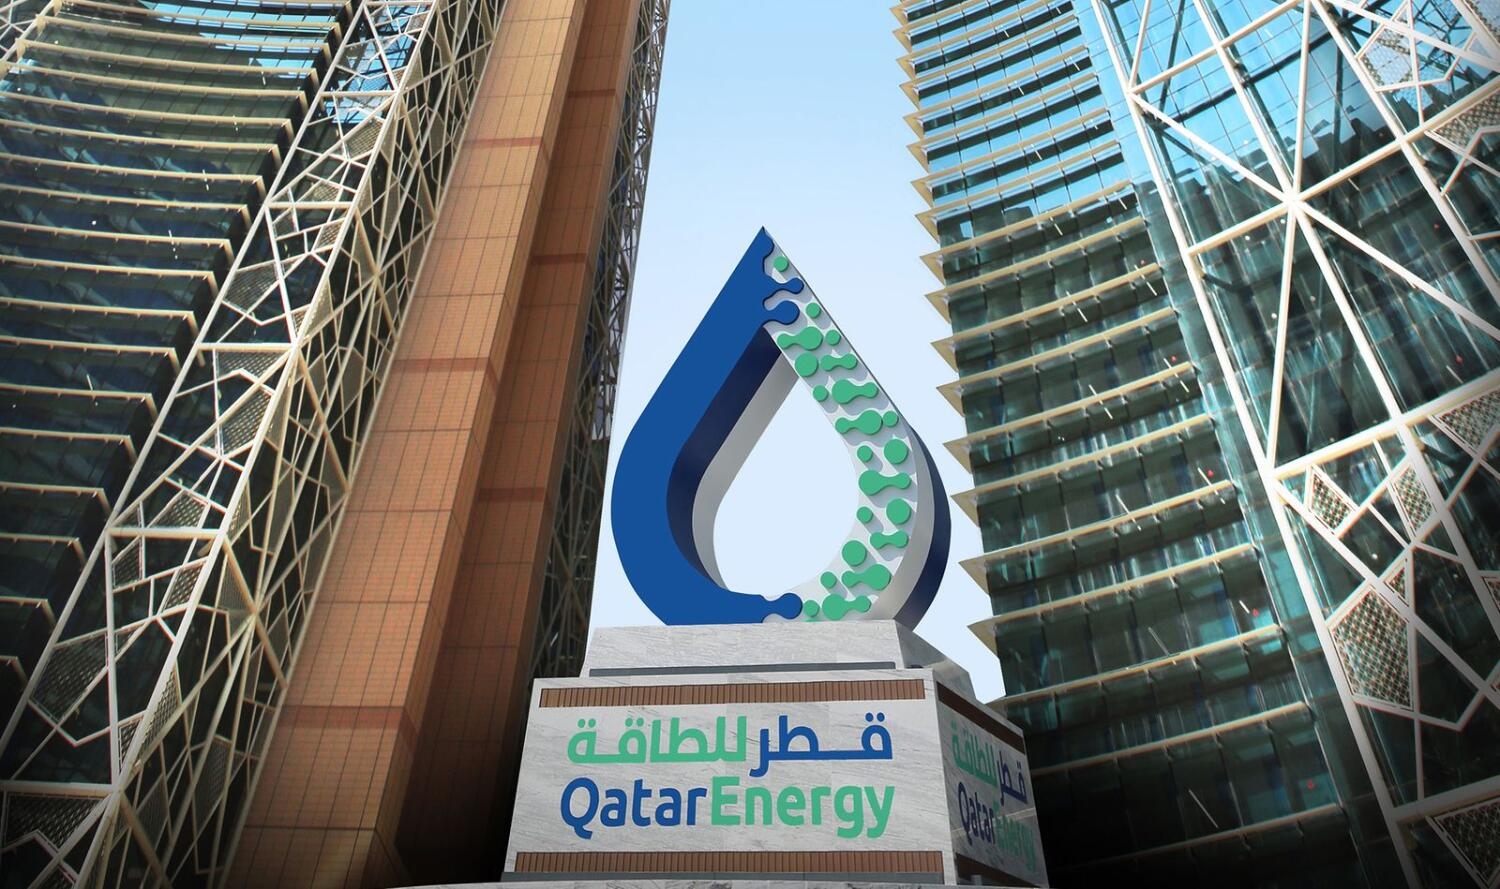 Qatar Energy announces record energy deal with China's Sinopec in a move that is expected to strengthen relations between the two countries (AFP)